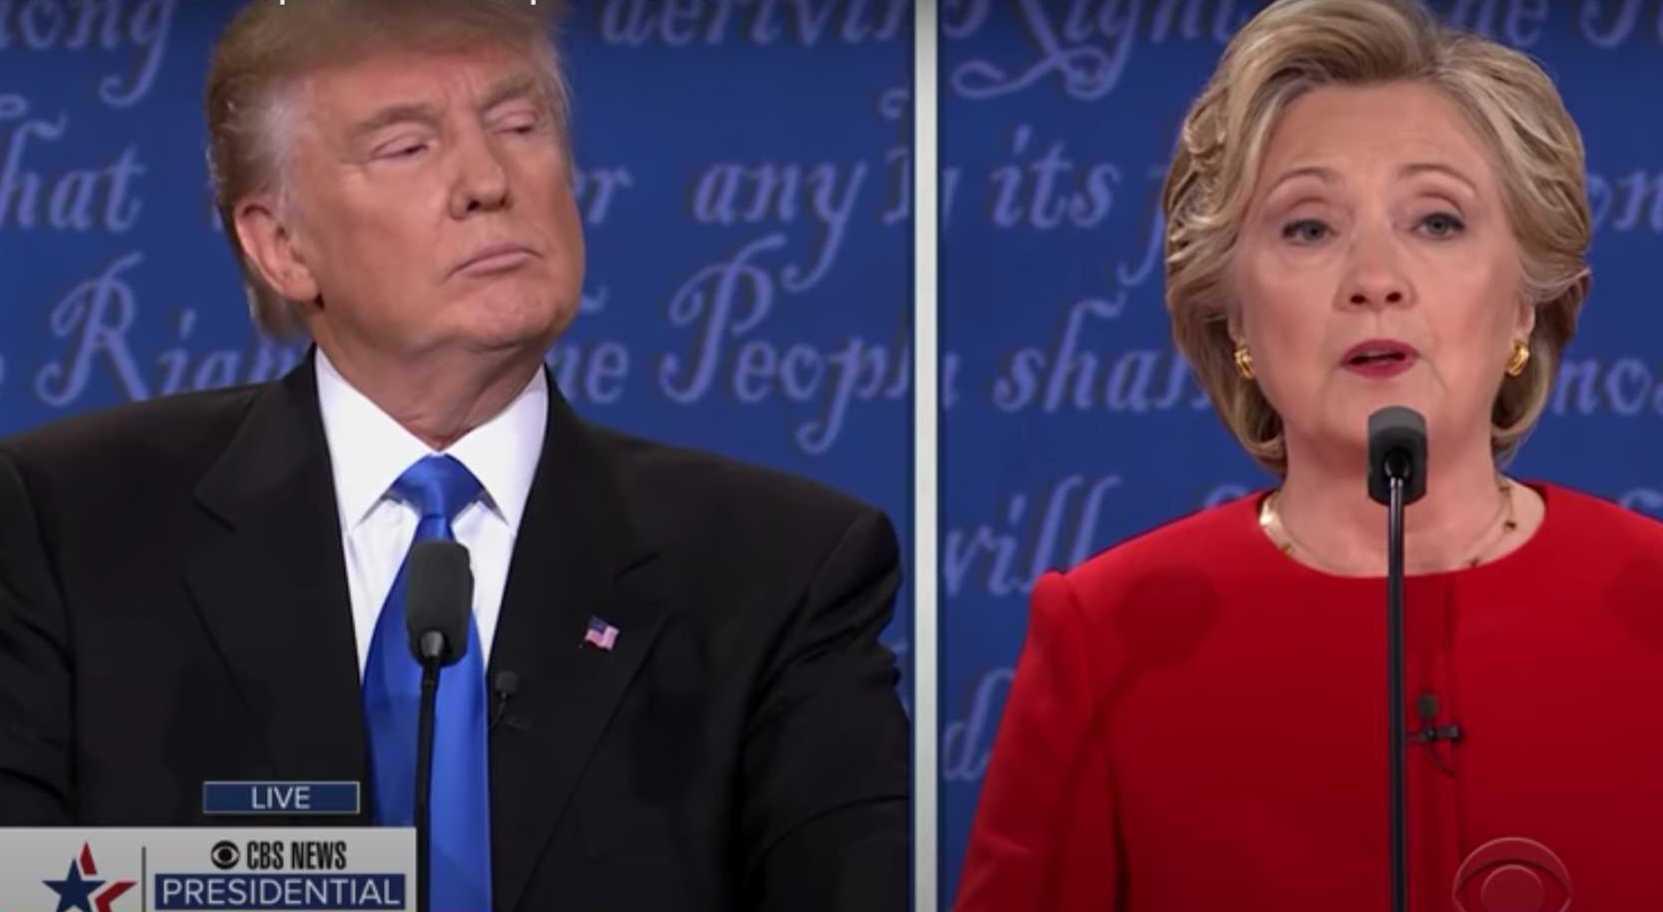 Donald Trump’s non-verbal communication in the presidential debate with Hillary Clinton 